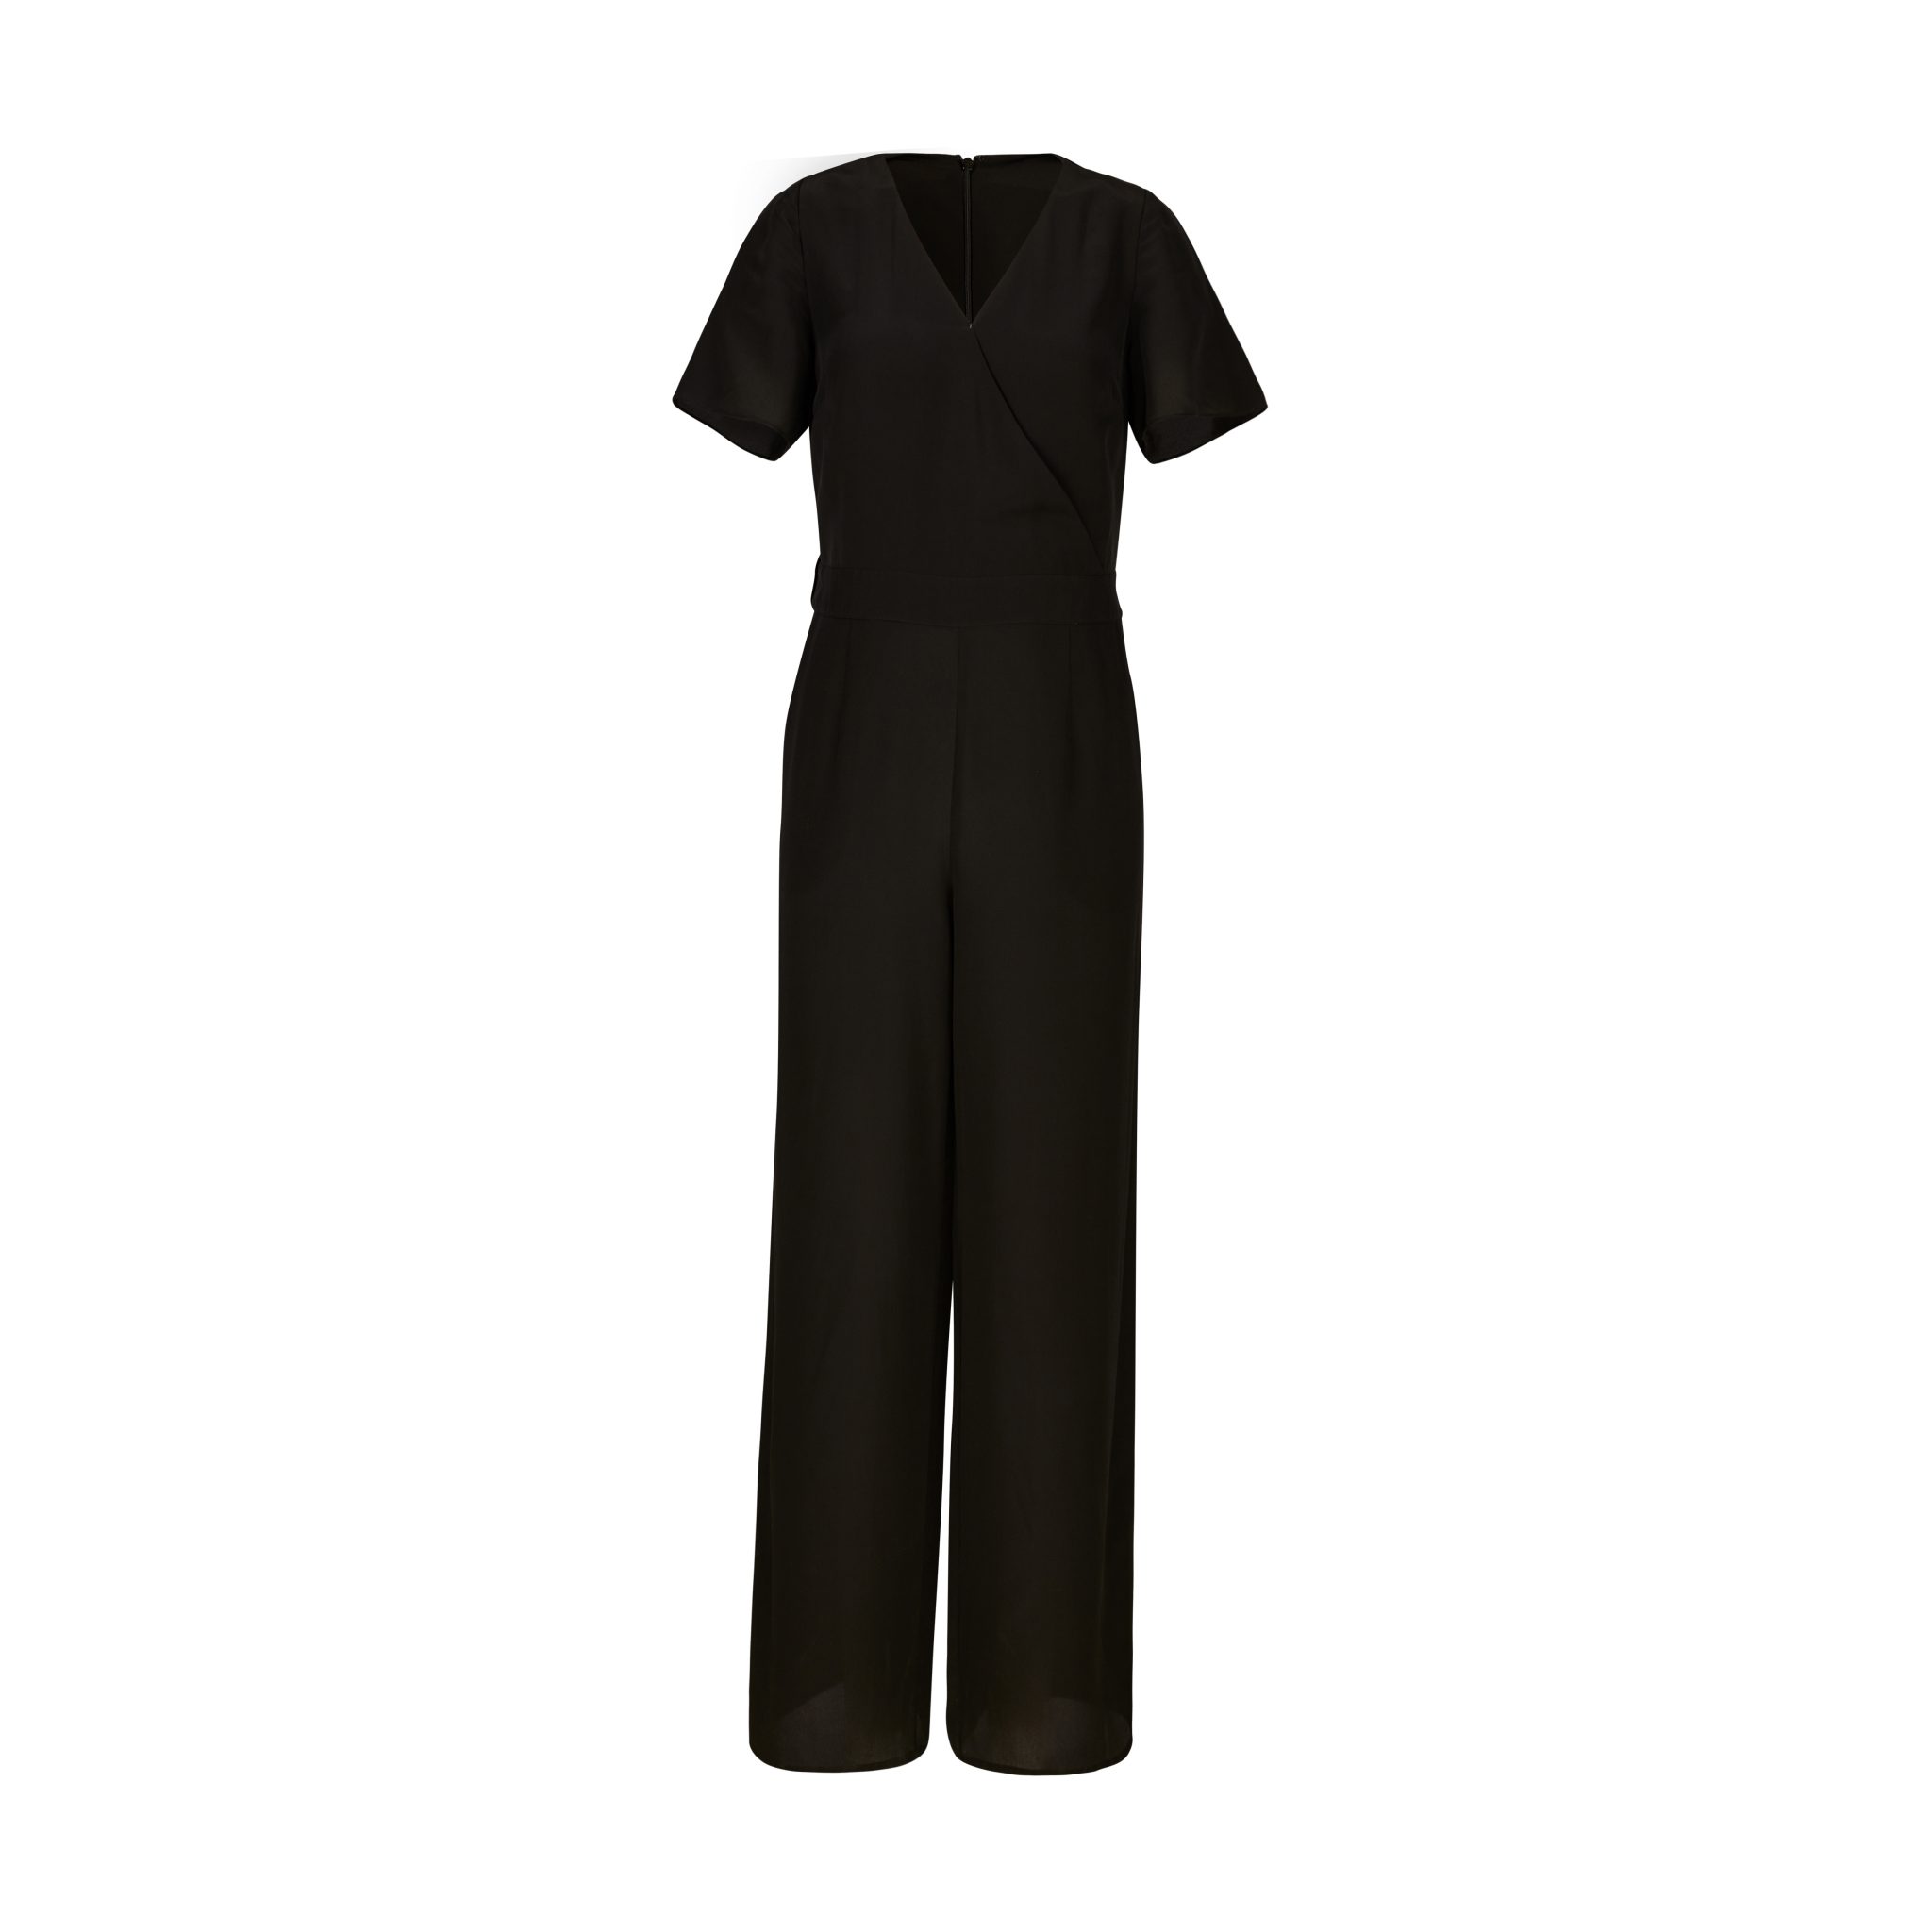 Ethereal London Silk Luciana Black Jumpsuit Womens Clothing Jumpsuits and rompers Full-length jumpsuits and rompers 